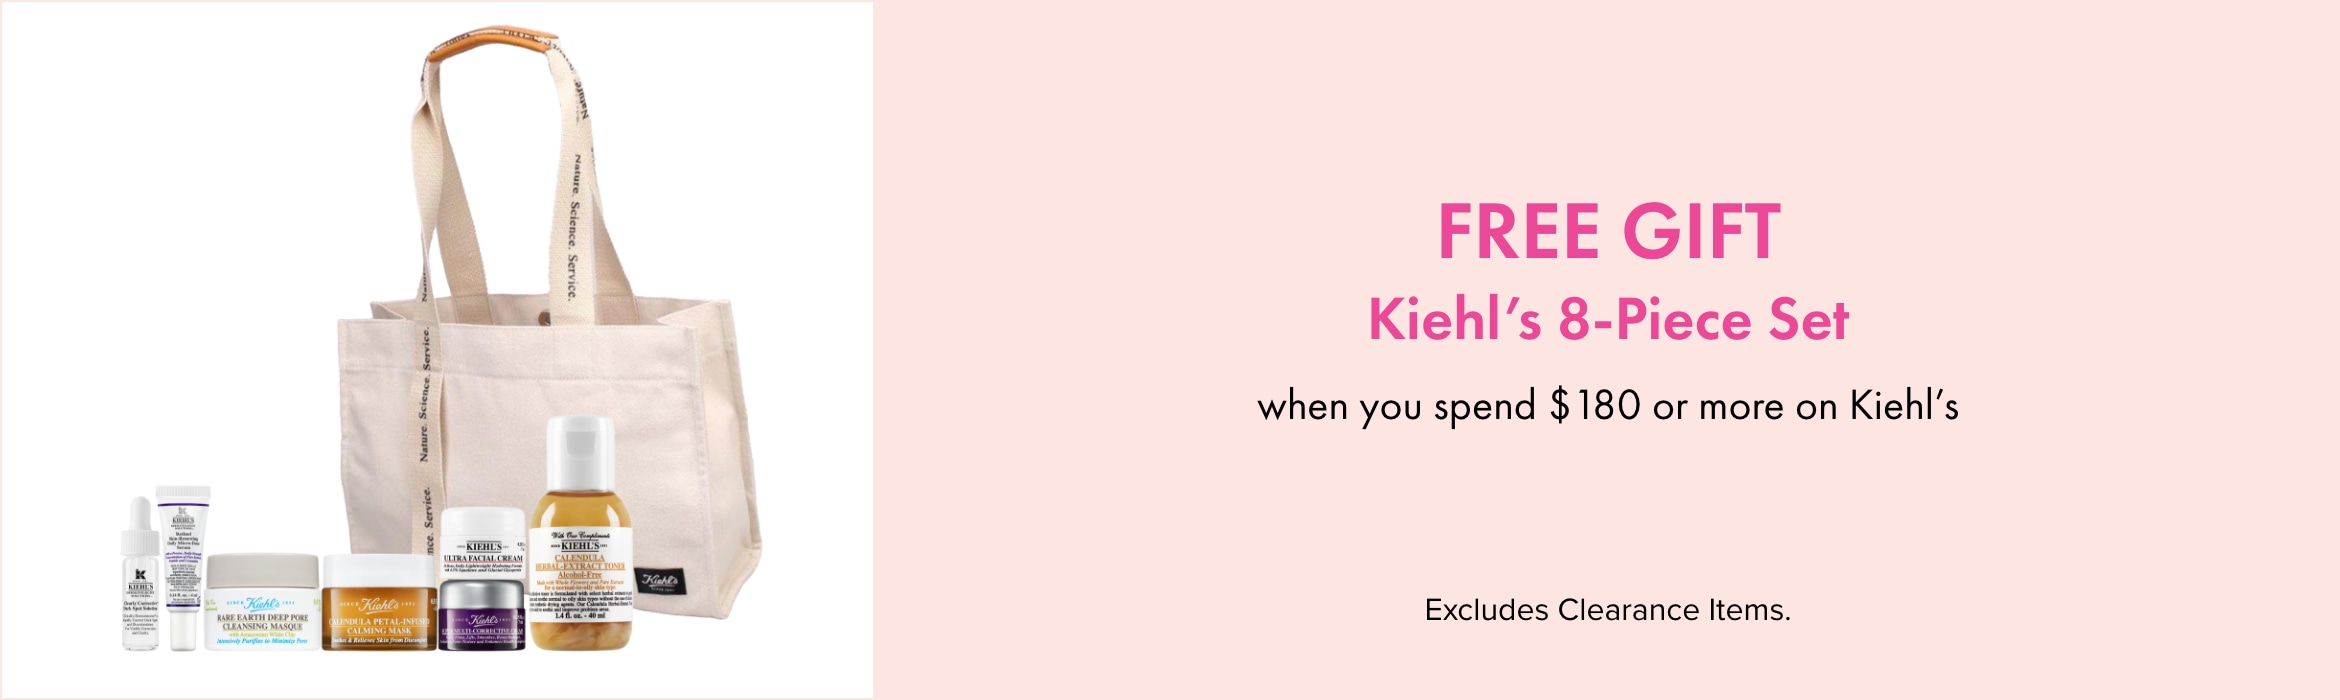 FREE GIFT 8-Piece Set when you spend $180 or more on Kiehls